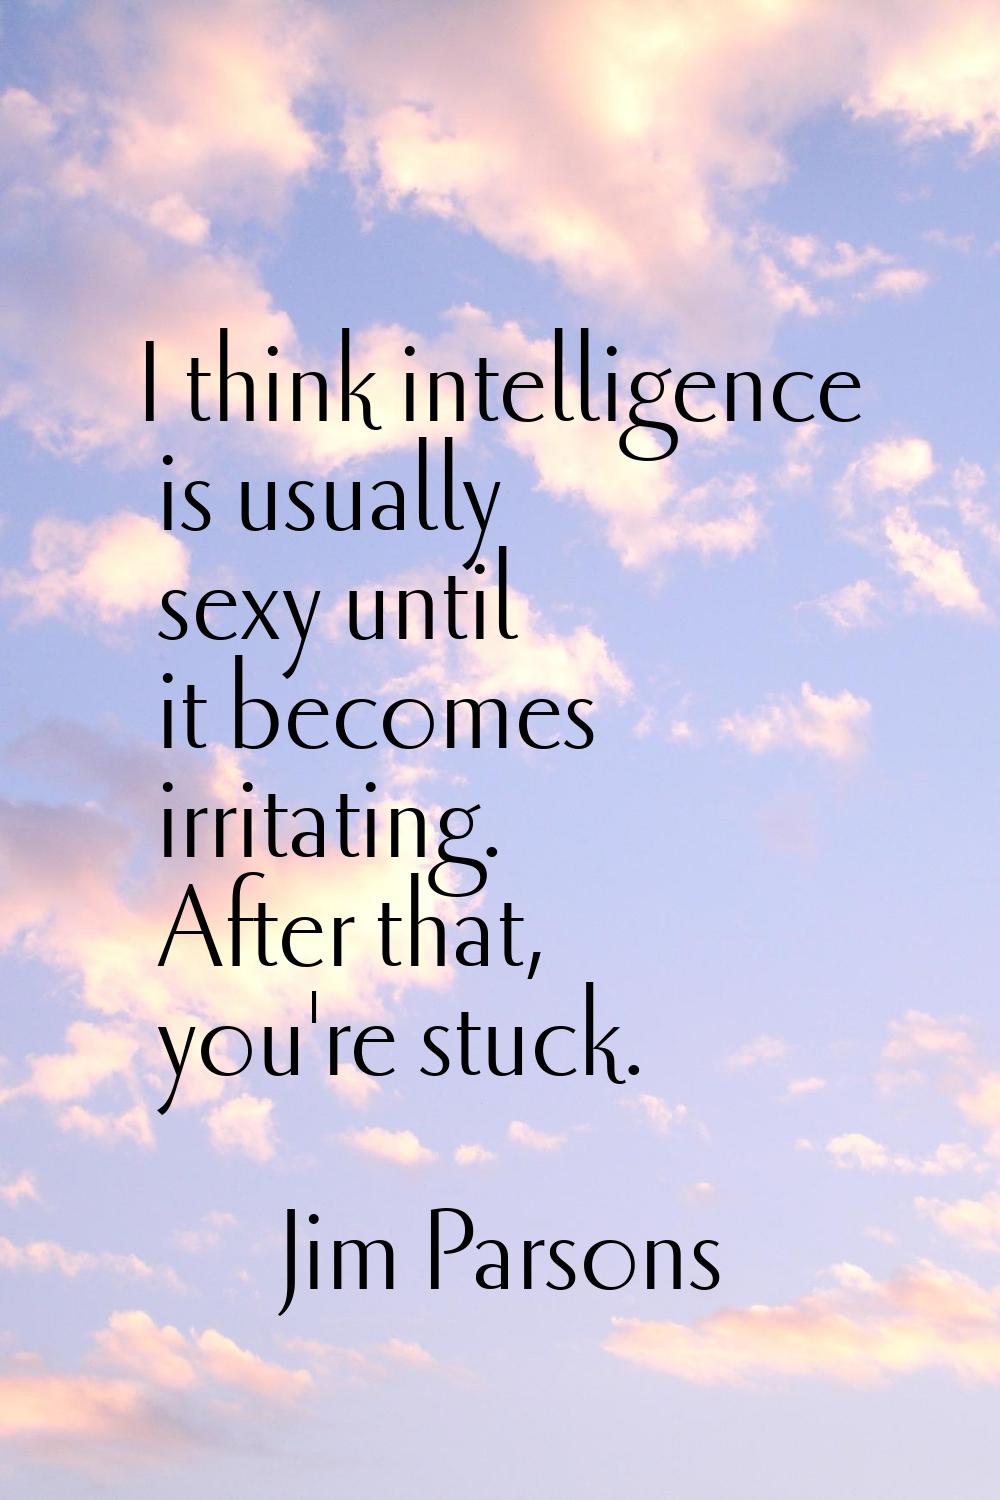 I think intelligence is usually sexy until it becomes irritating. After that, you're stuck.